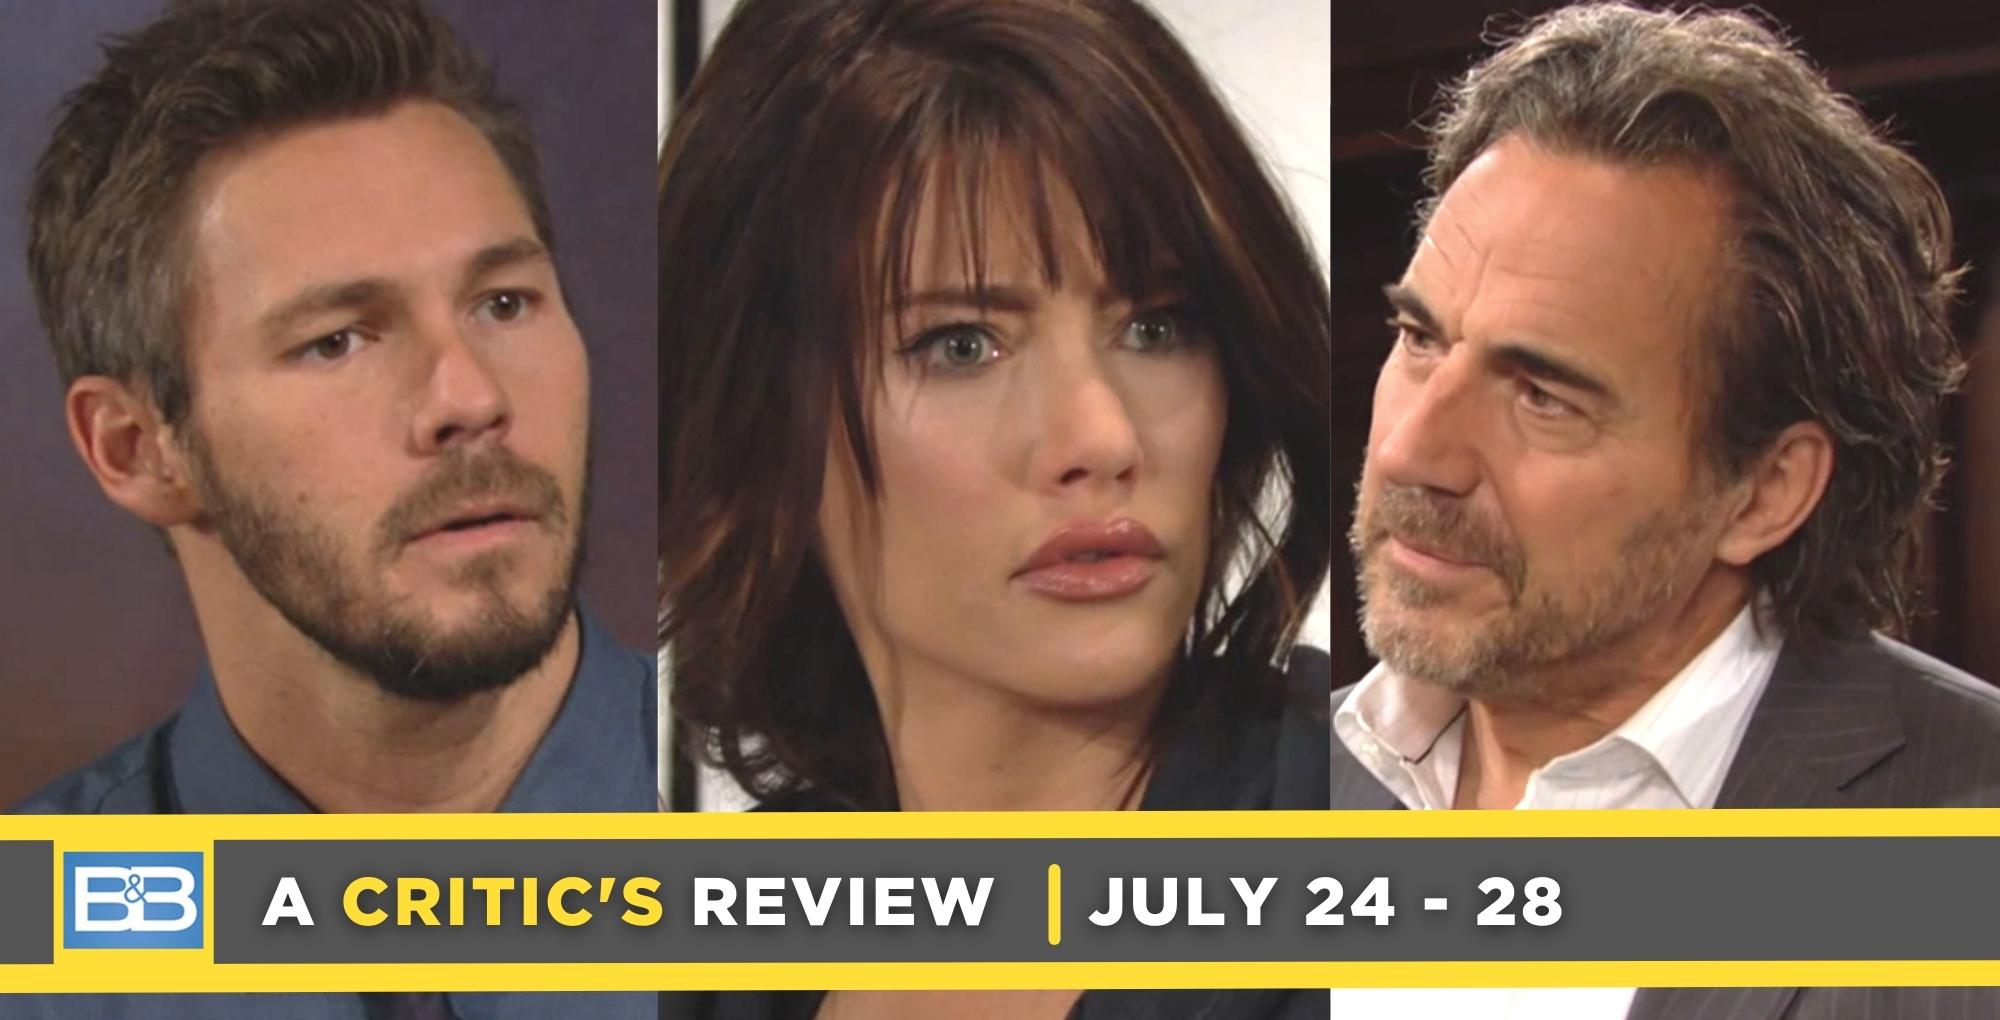 the bold and the beautiful critic's review for july 24 – july 28, 2023, three images, liam, steffy, and ridge.